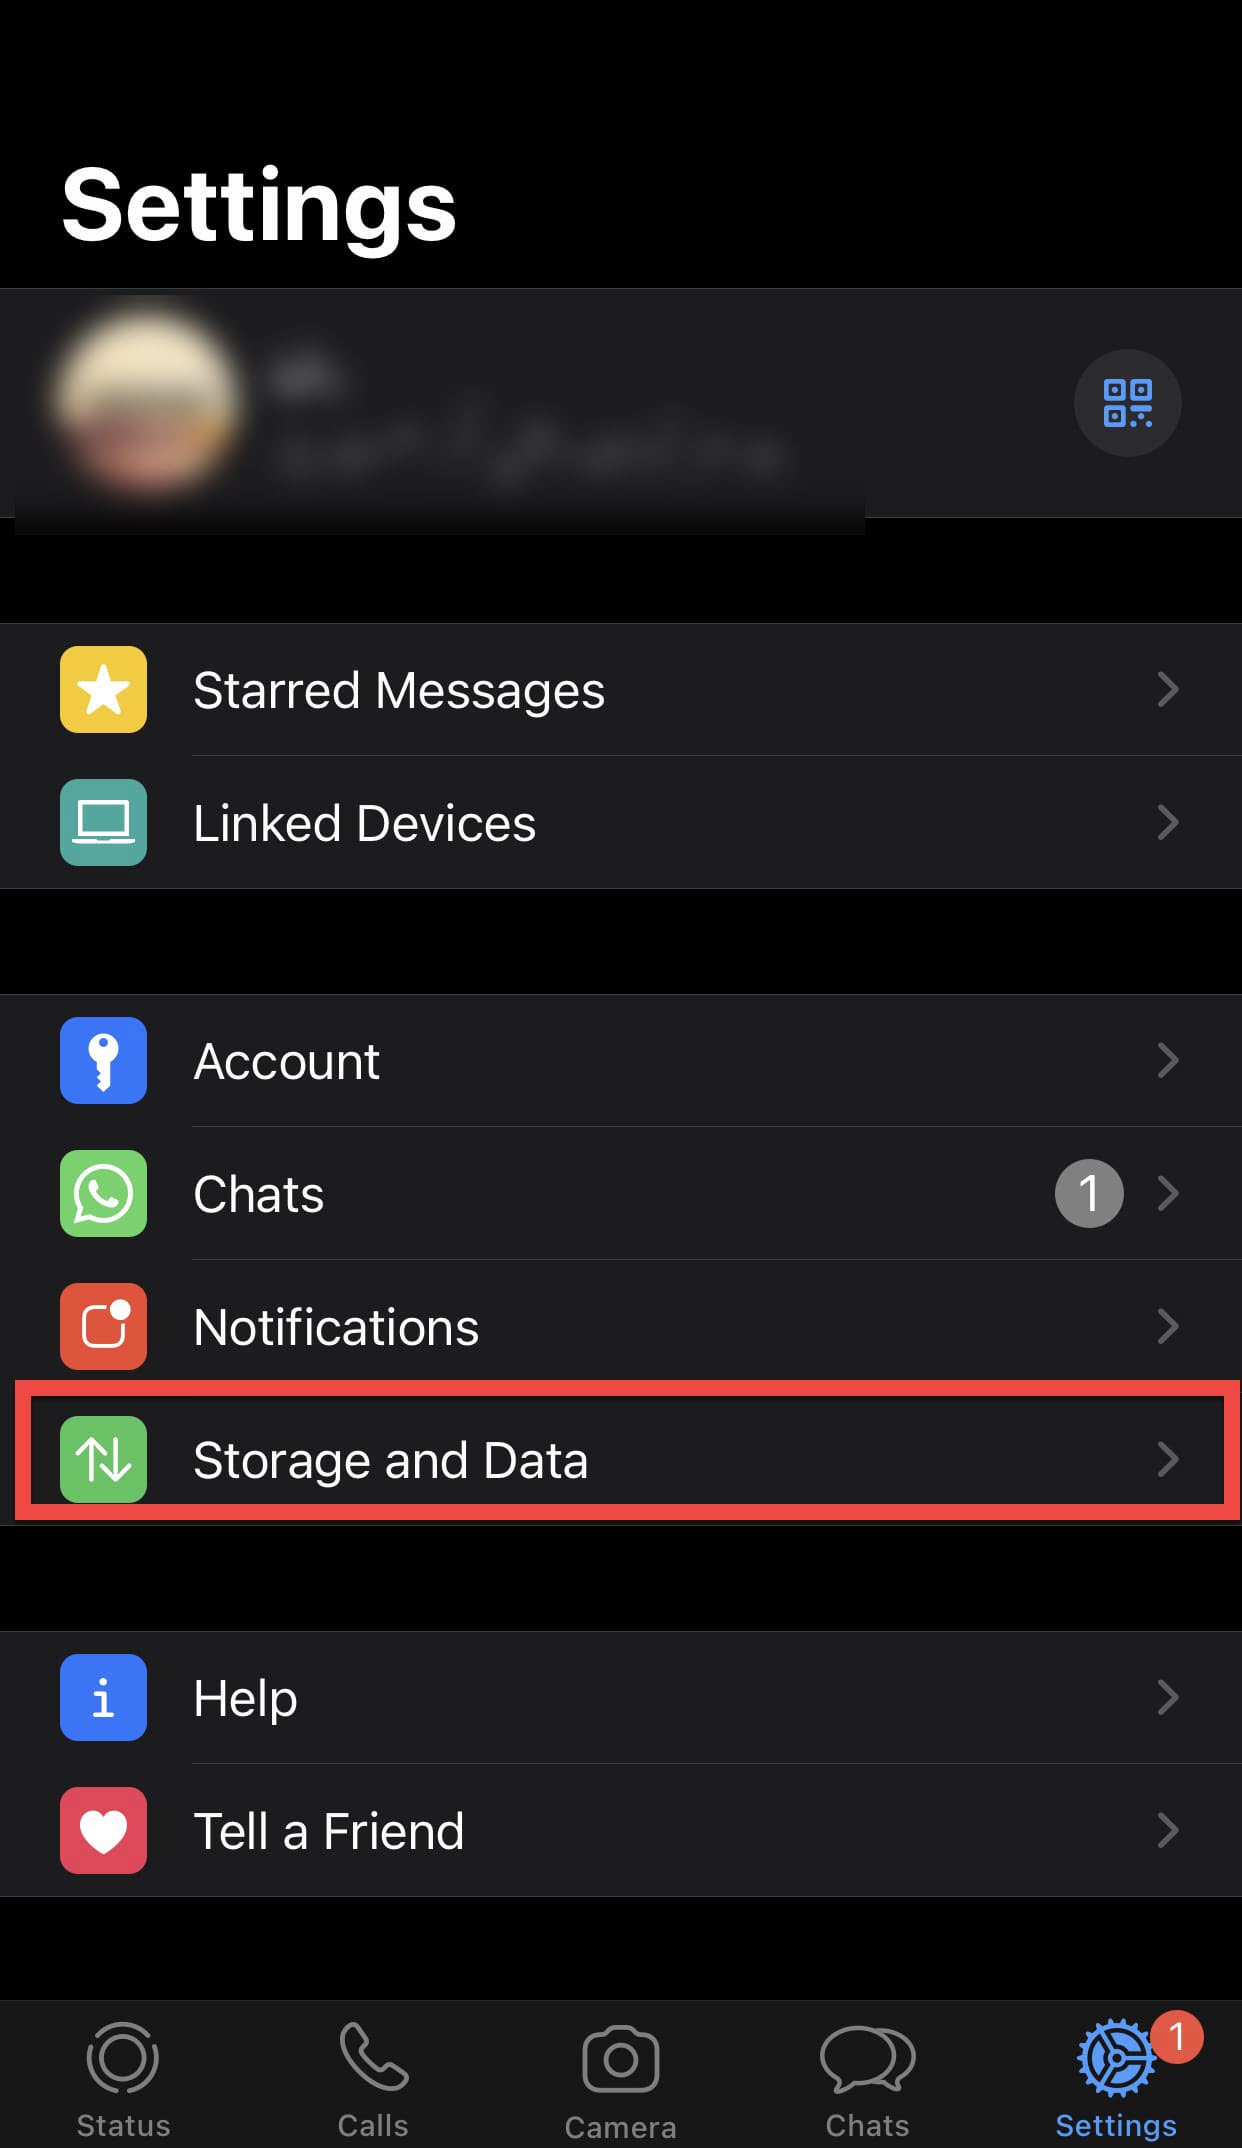 How To Send High-Quality Photos On WhatsApp in iOS (iPhone) in 2 Ways